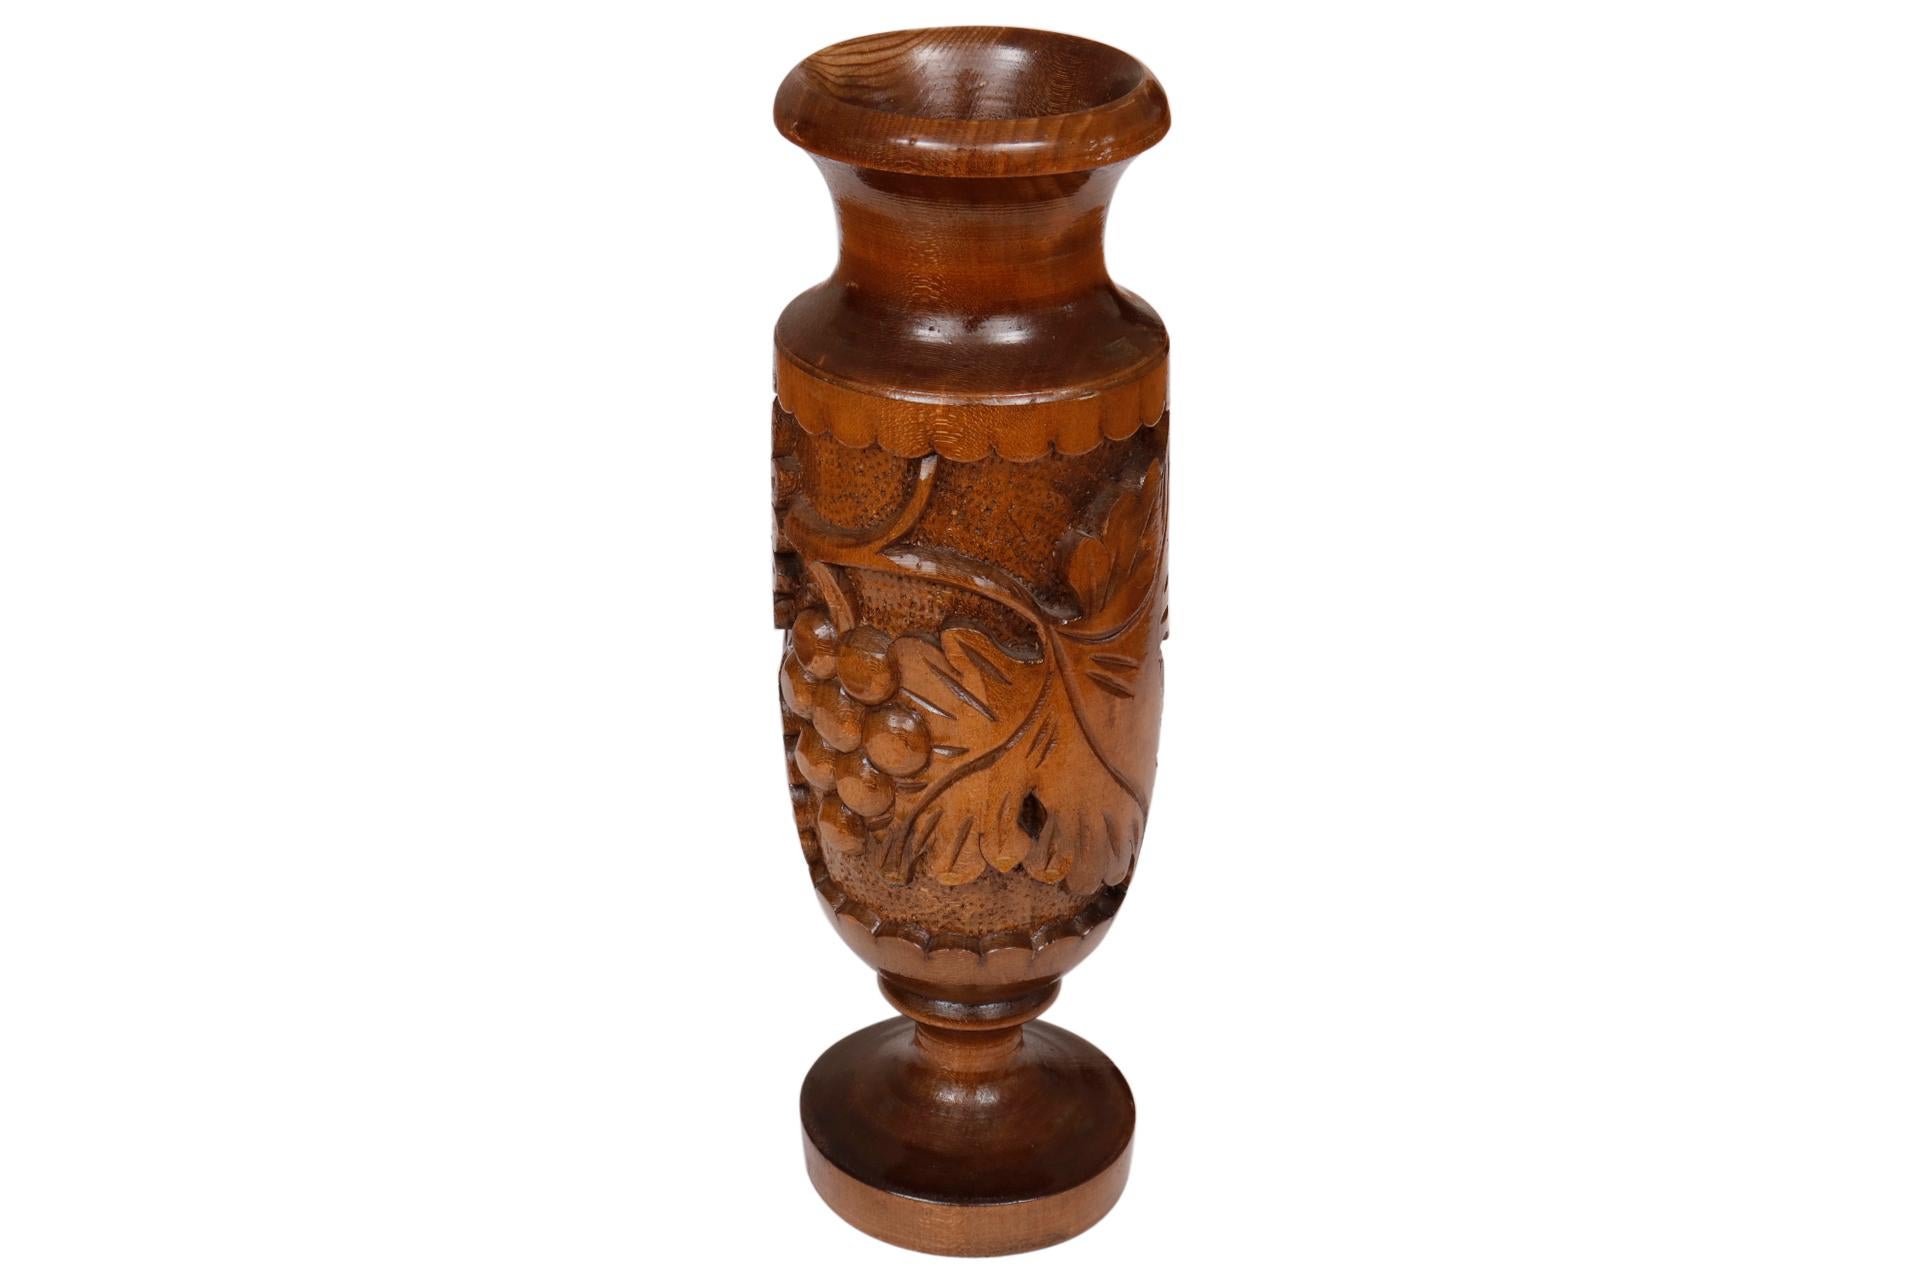 A turned wooden vase richly carved with grapes and vine leaves, framed with a scalloped edge. The lip and foot are thick and finely turned.